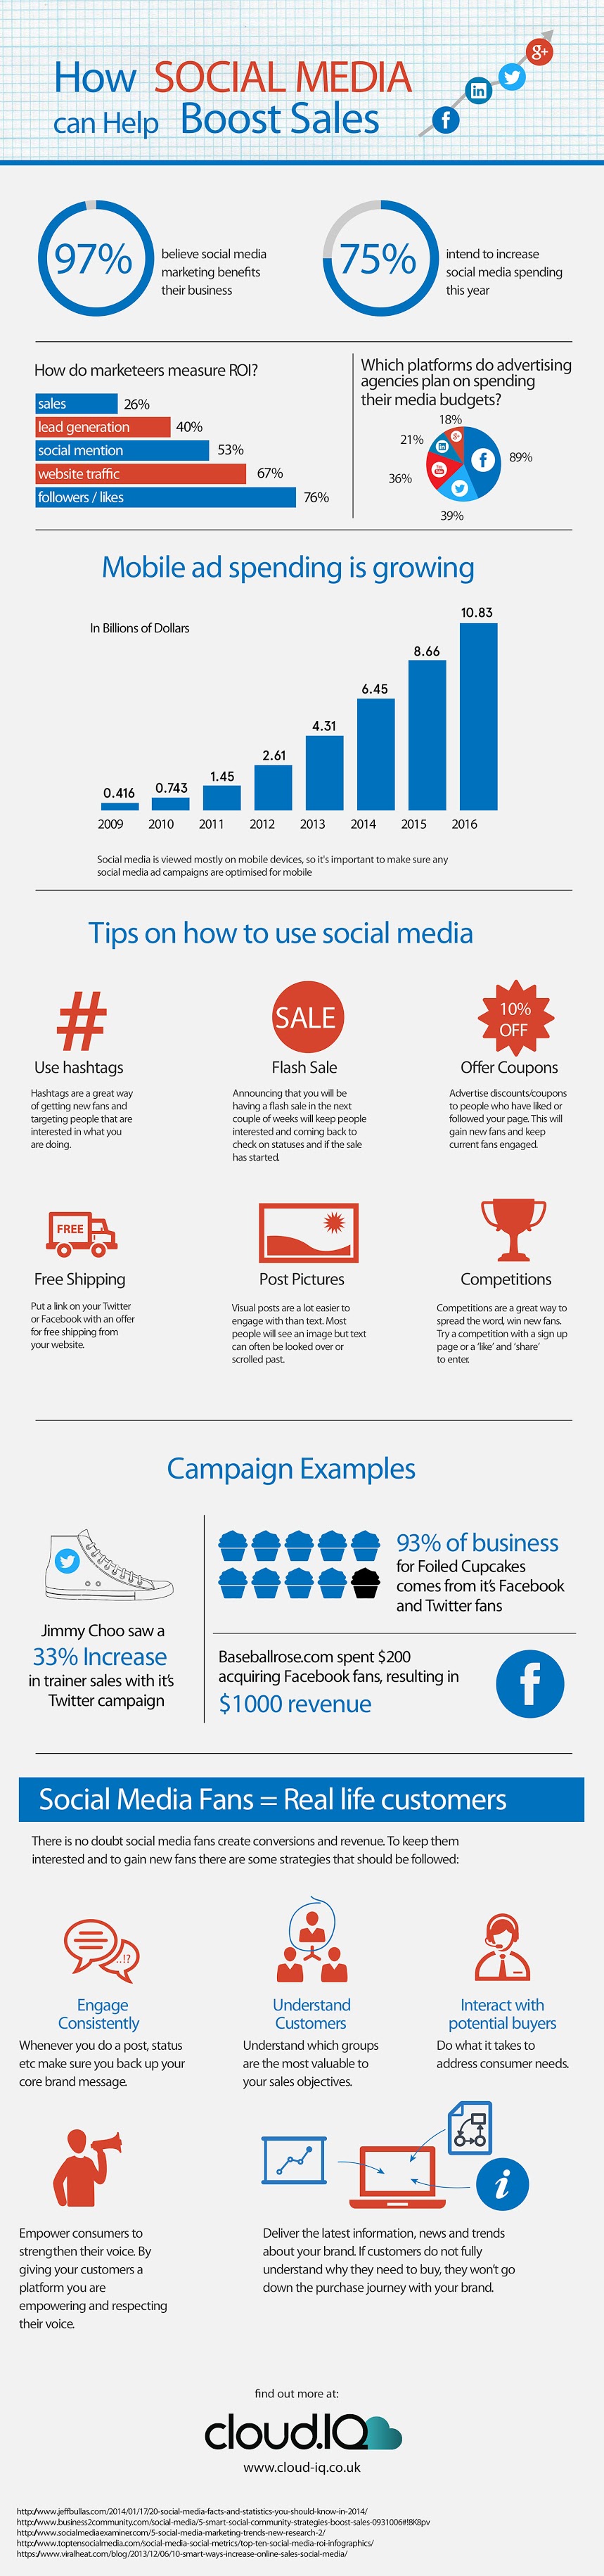 Infographic: How Social Media Can Help Boost Sales 